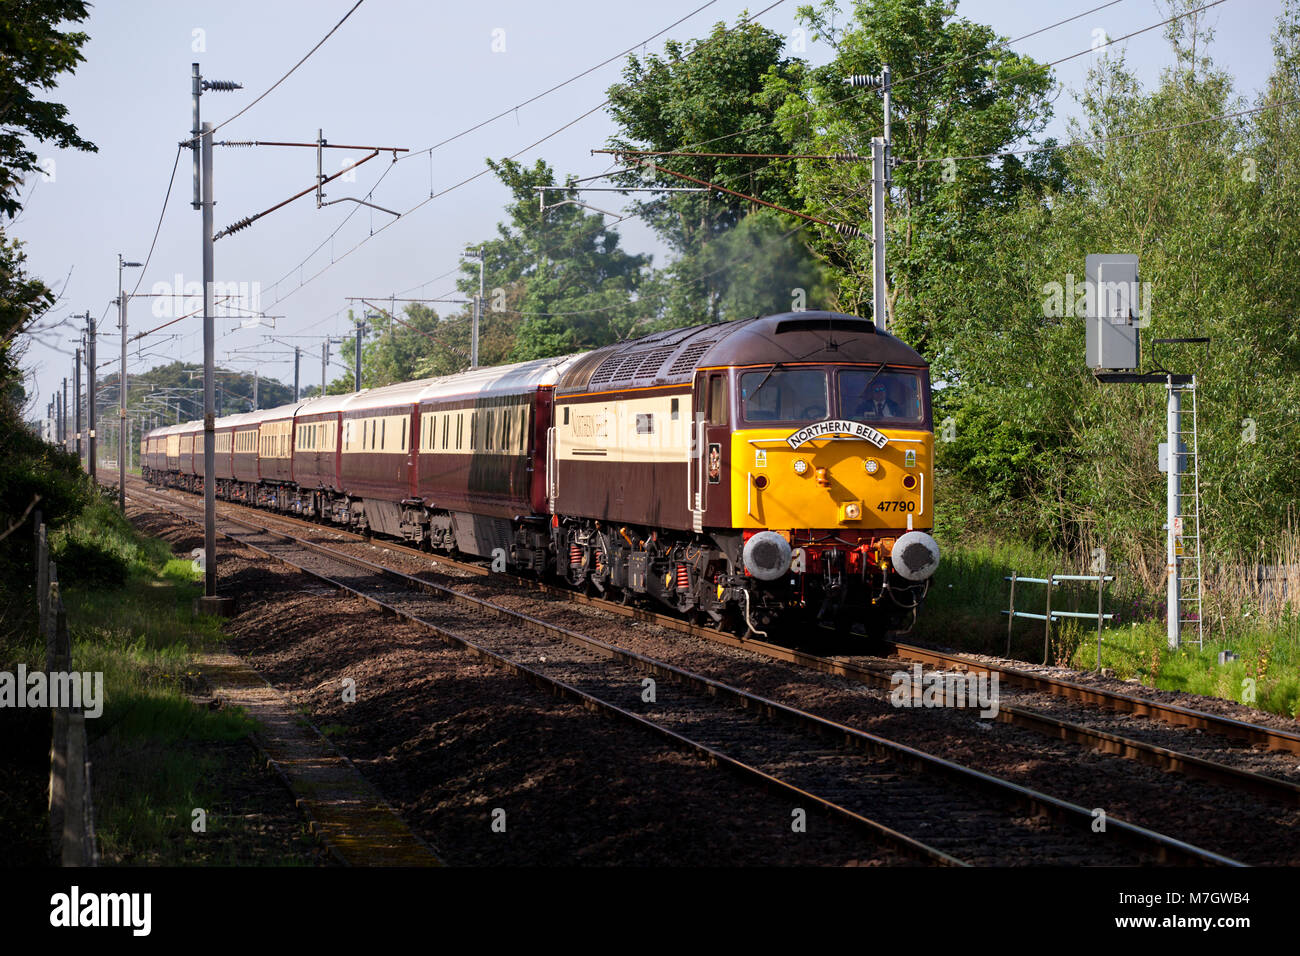 The Belmond Northern Belle luxury dining train heads north on the west coast main line at Bolton Le Sands hauled by a DRS class 47 locomotive Stock Photo